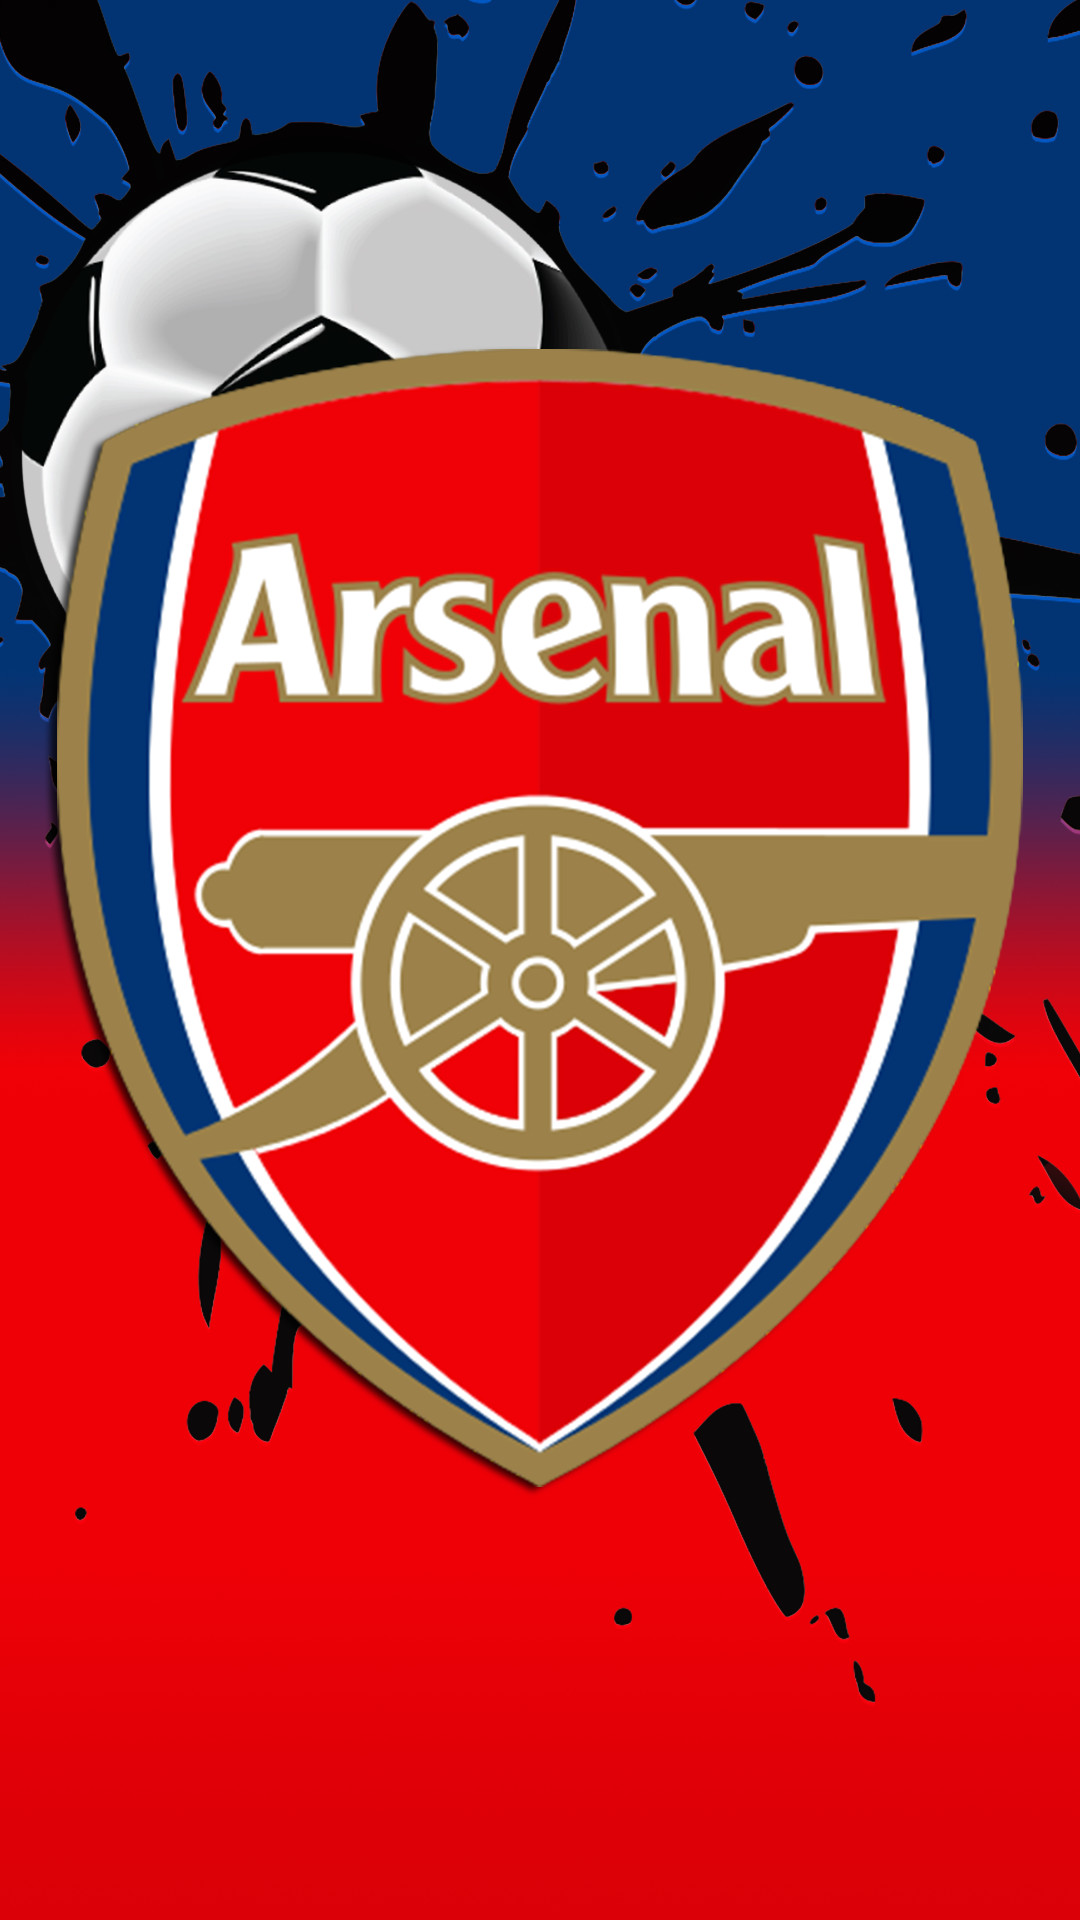 Arsenal Fc Iphone Wallpaper - Arsenal Fc Wallpapers For Mobile Phones - HD Wallpaper 